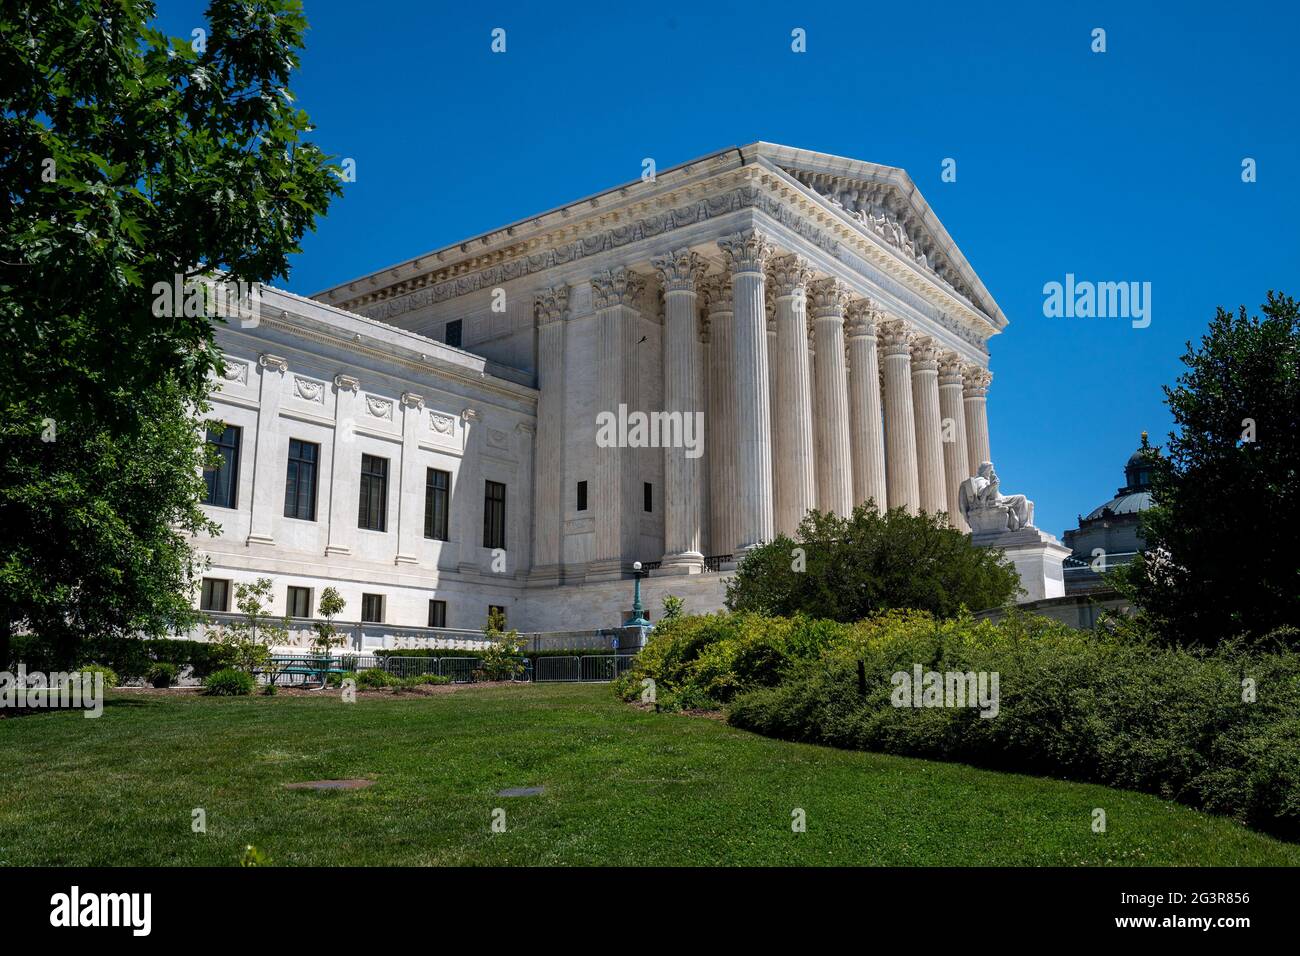 Washington, United States. 17th June, 2021. The U.S. Supreme Court building is seen on Capitol Hill in Washington, DC on Thursday, June 17, 2021. The Supreme Court dismissed the latest challenge to the Affordable Care Act on Thursday, saying Republican-led states do not have the legal standing to try to upend the law. Photo by Ken Cedeno/UPI Credit: UPI/Alamy Live News Stock Photo